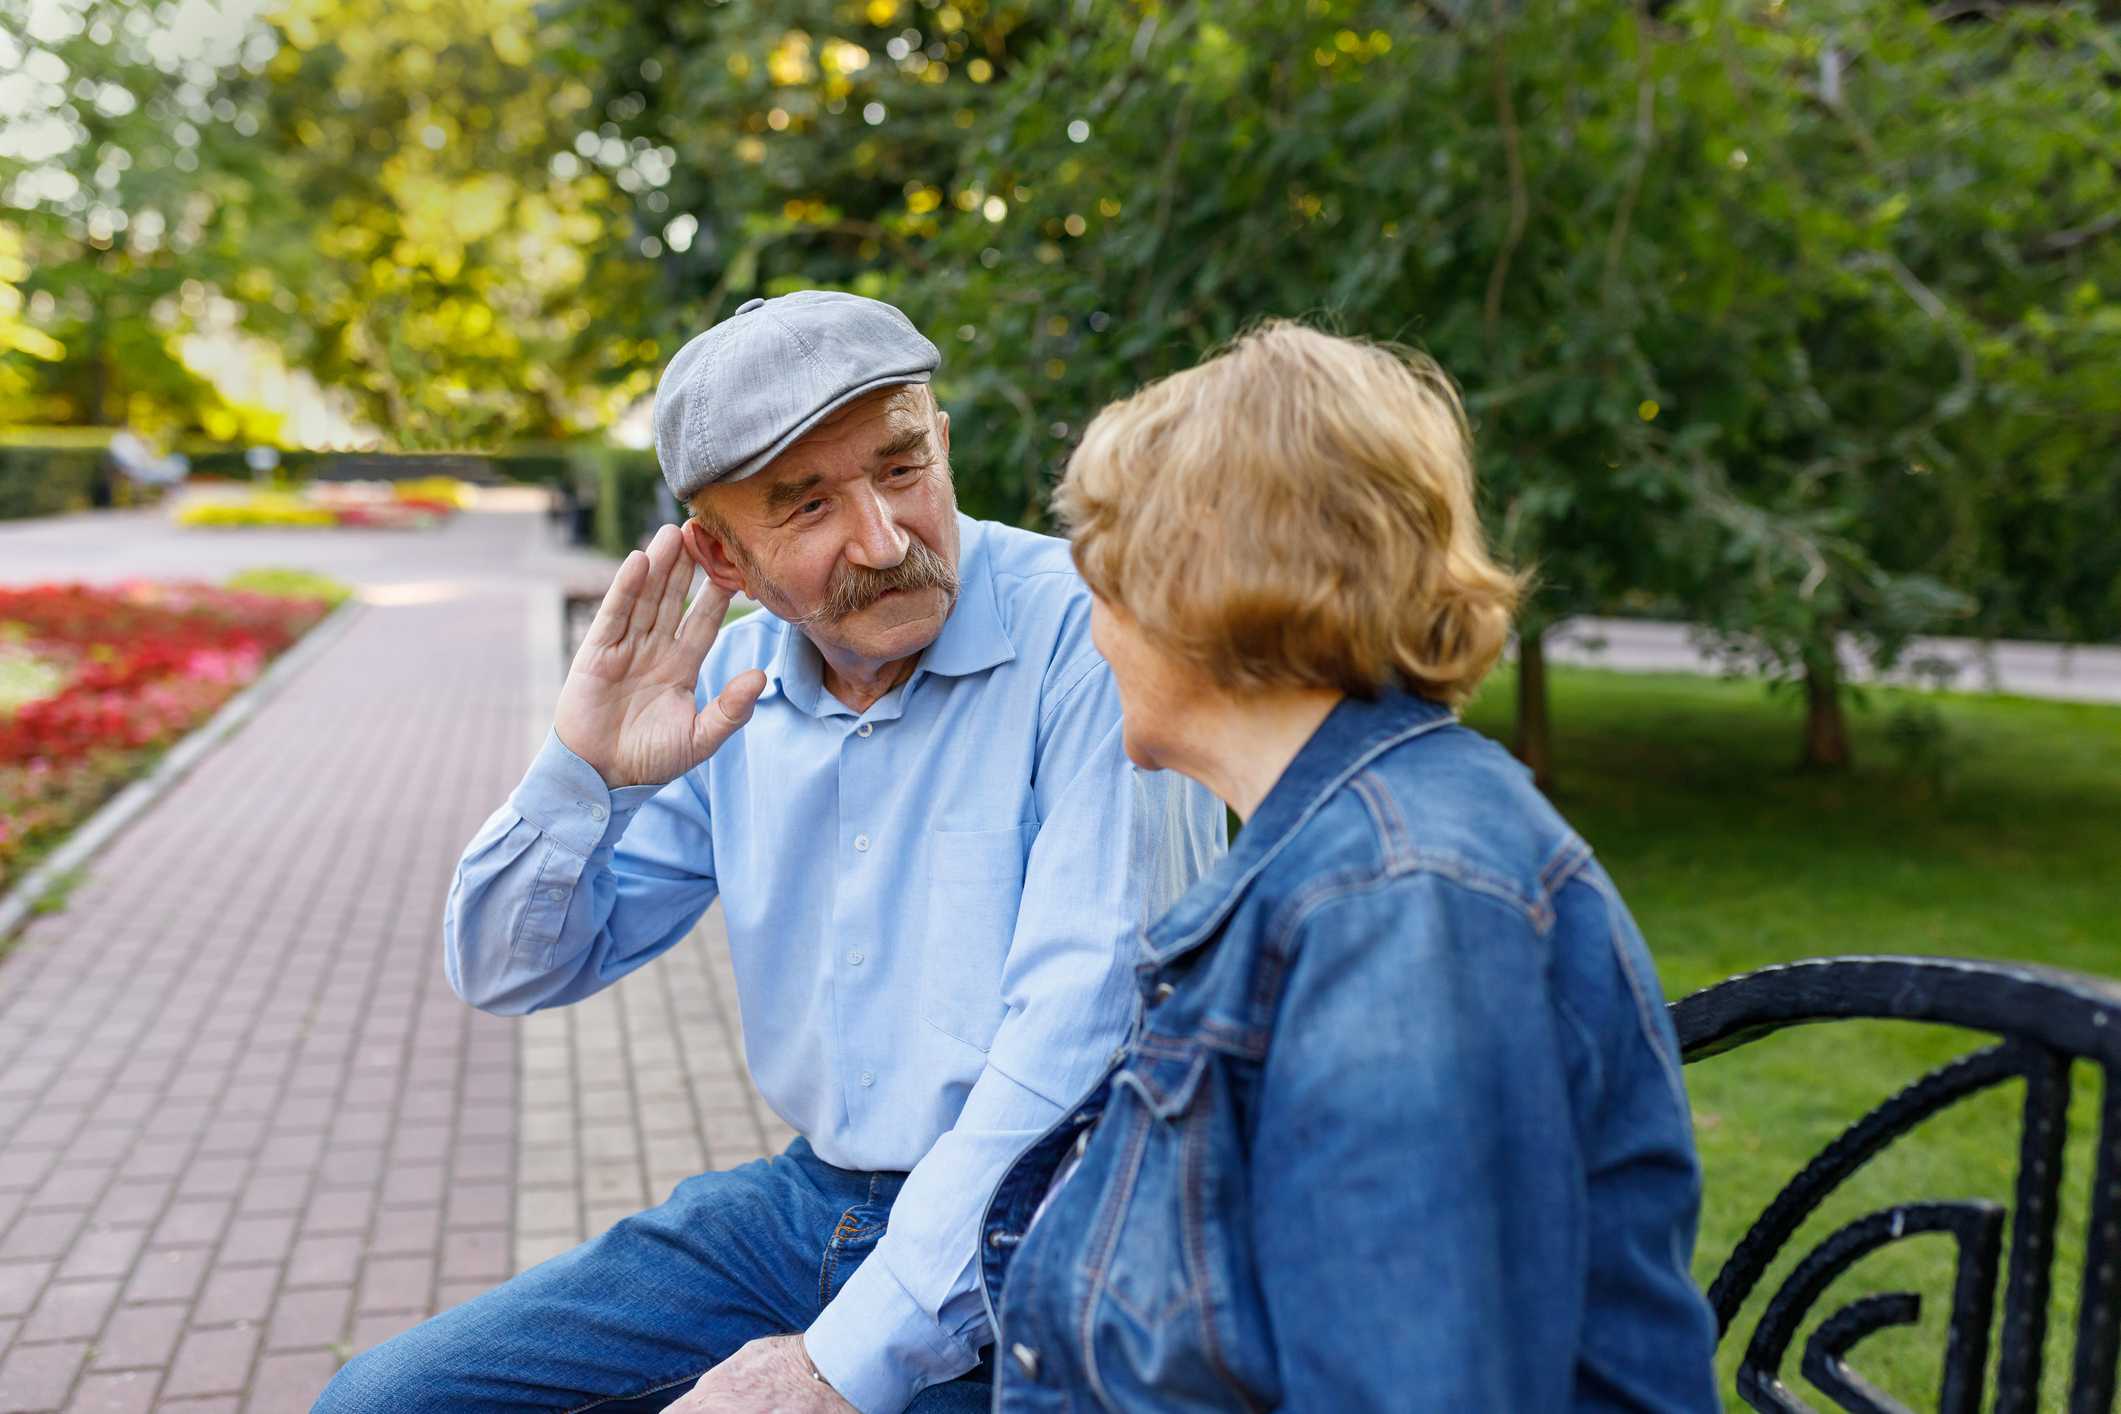 An older Michigan couple sitting in a park but struggling to hear each other because of their hearing loss.